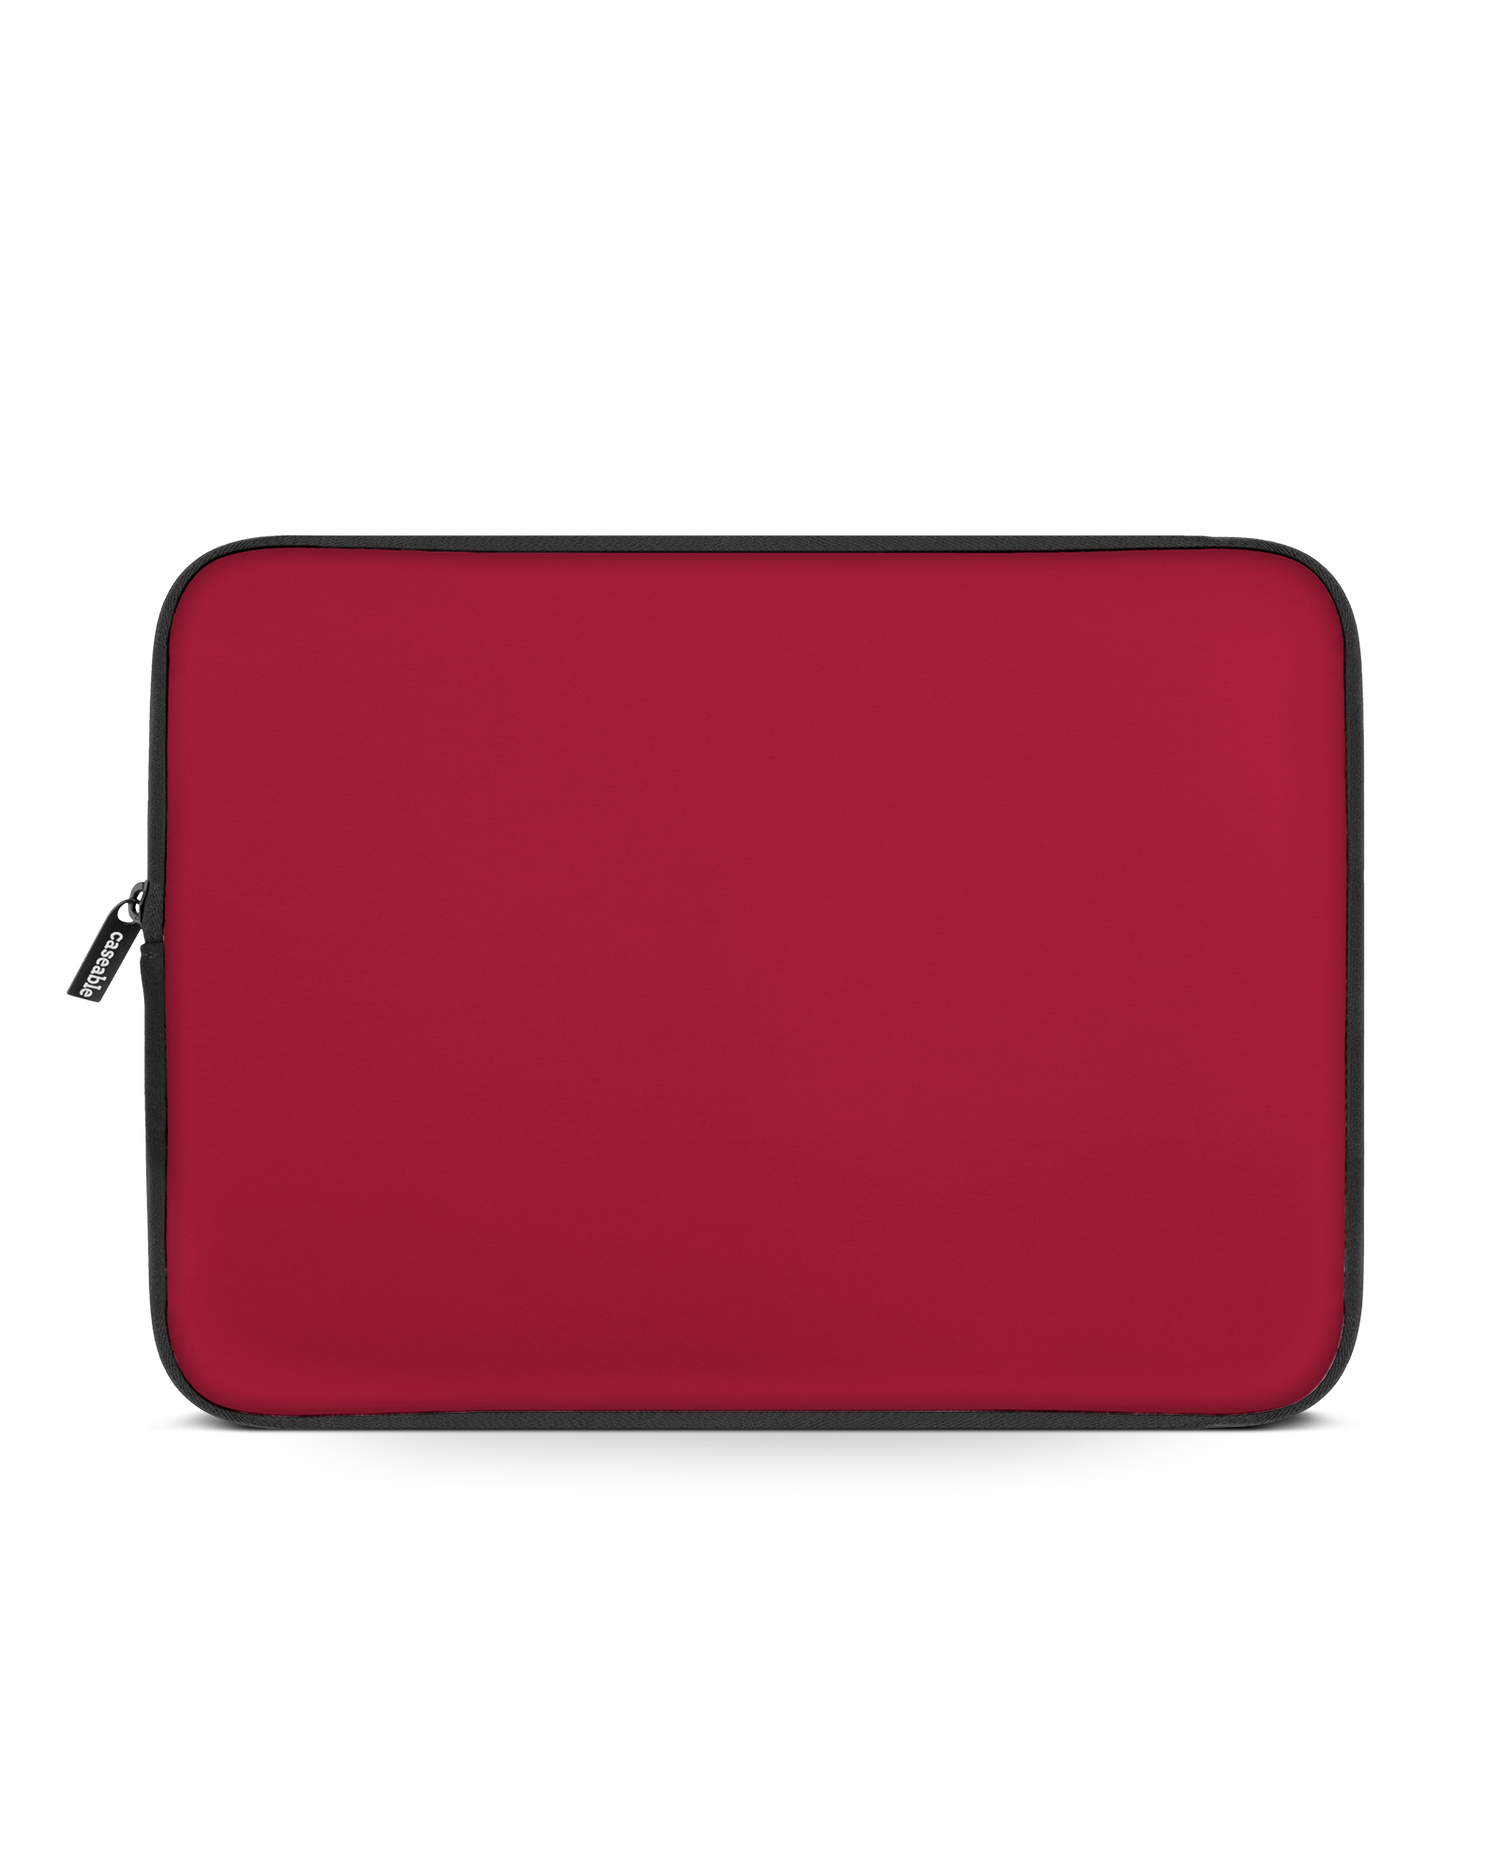 RED Laptop Case 15 inch: Front View